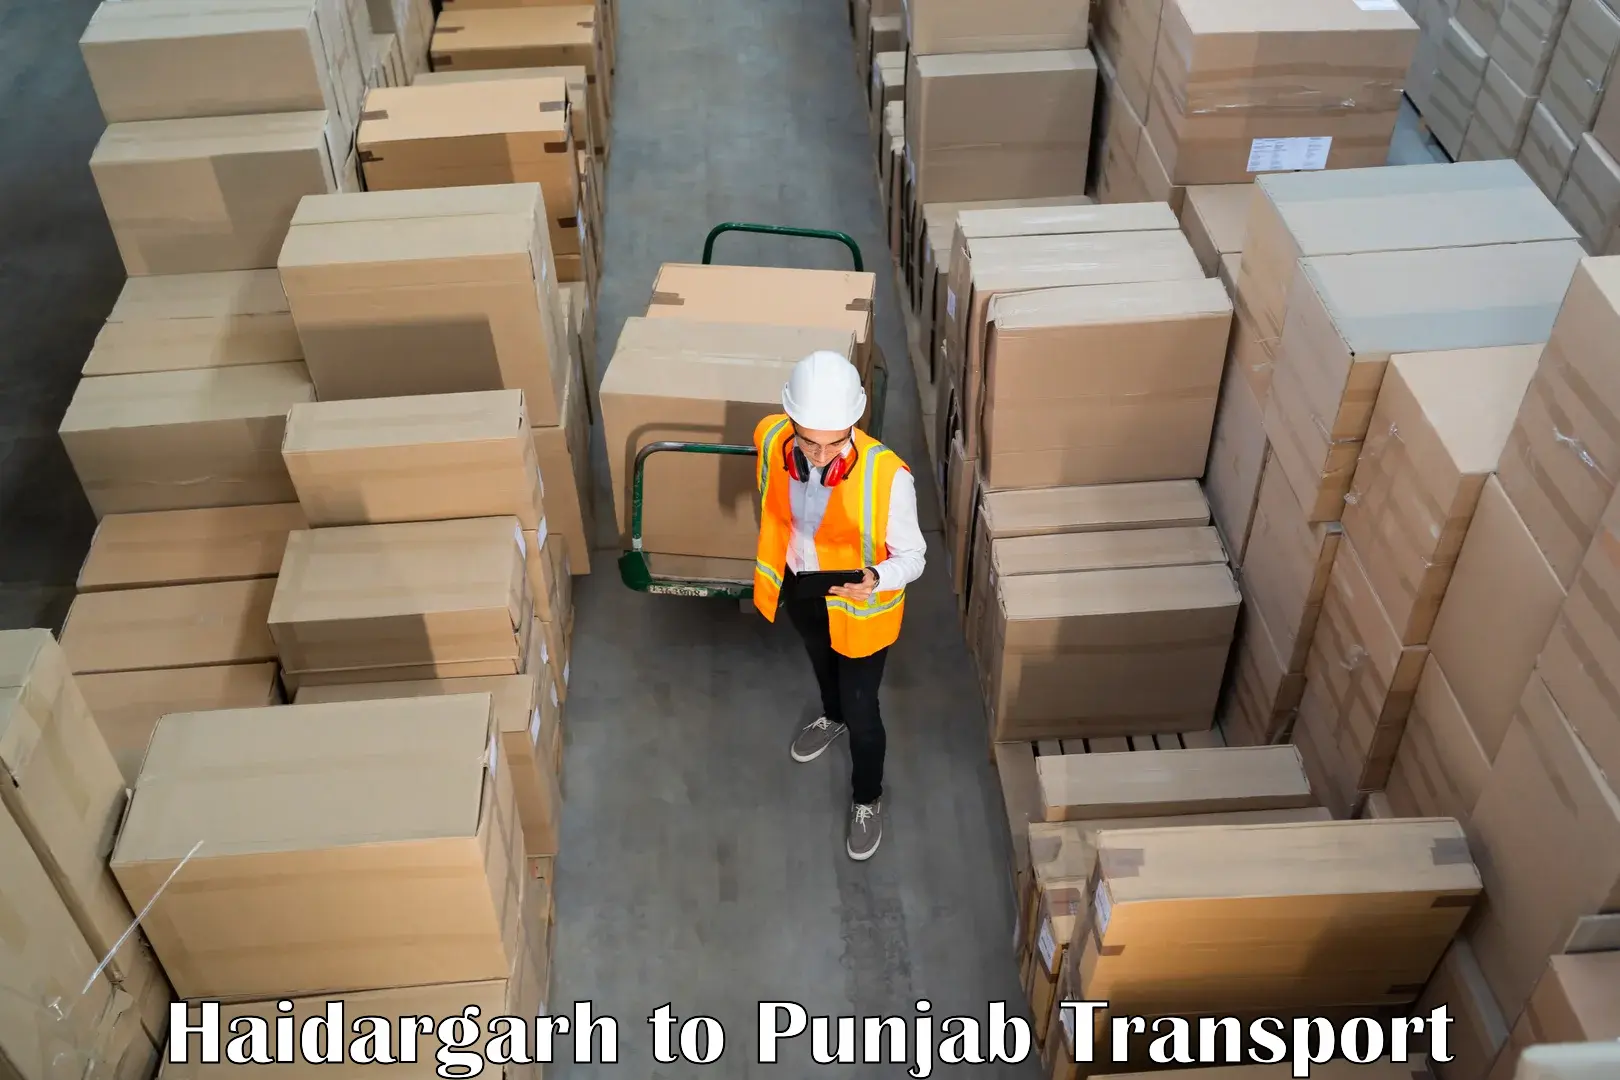 Goods delivery service Haidargarh to Goindwal Sahib